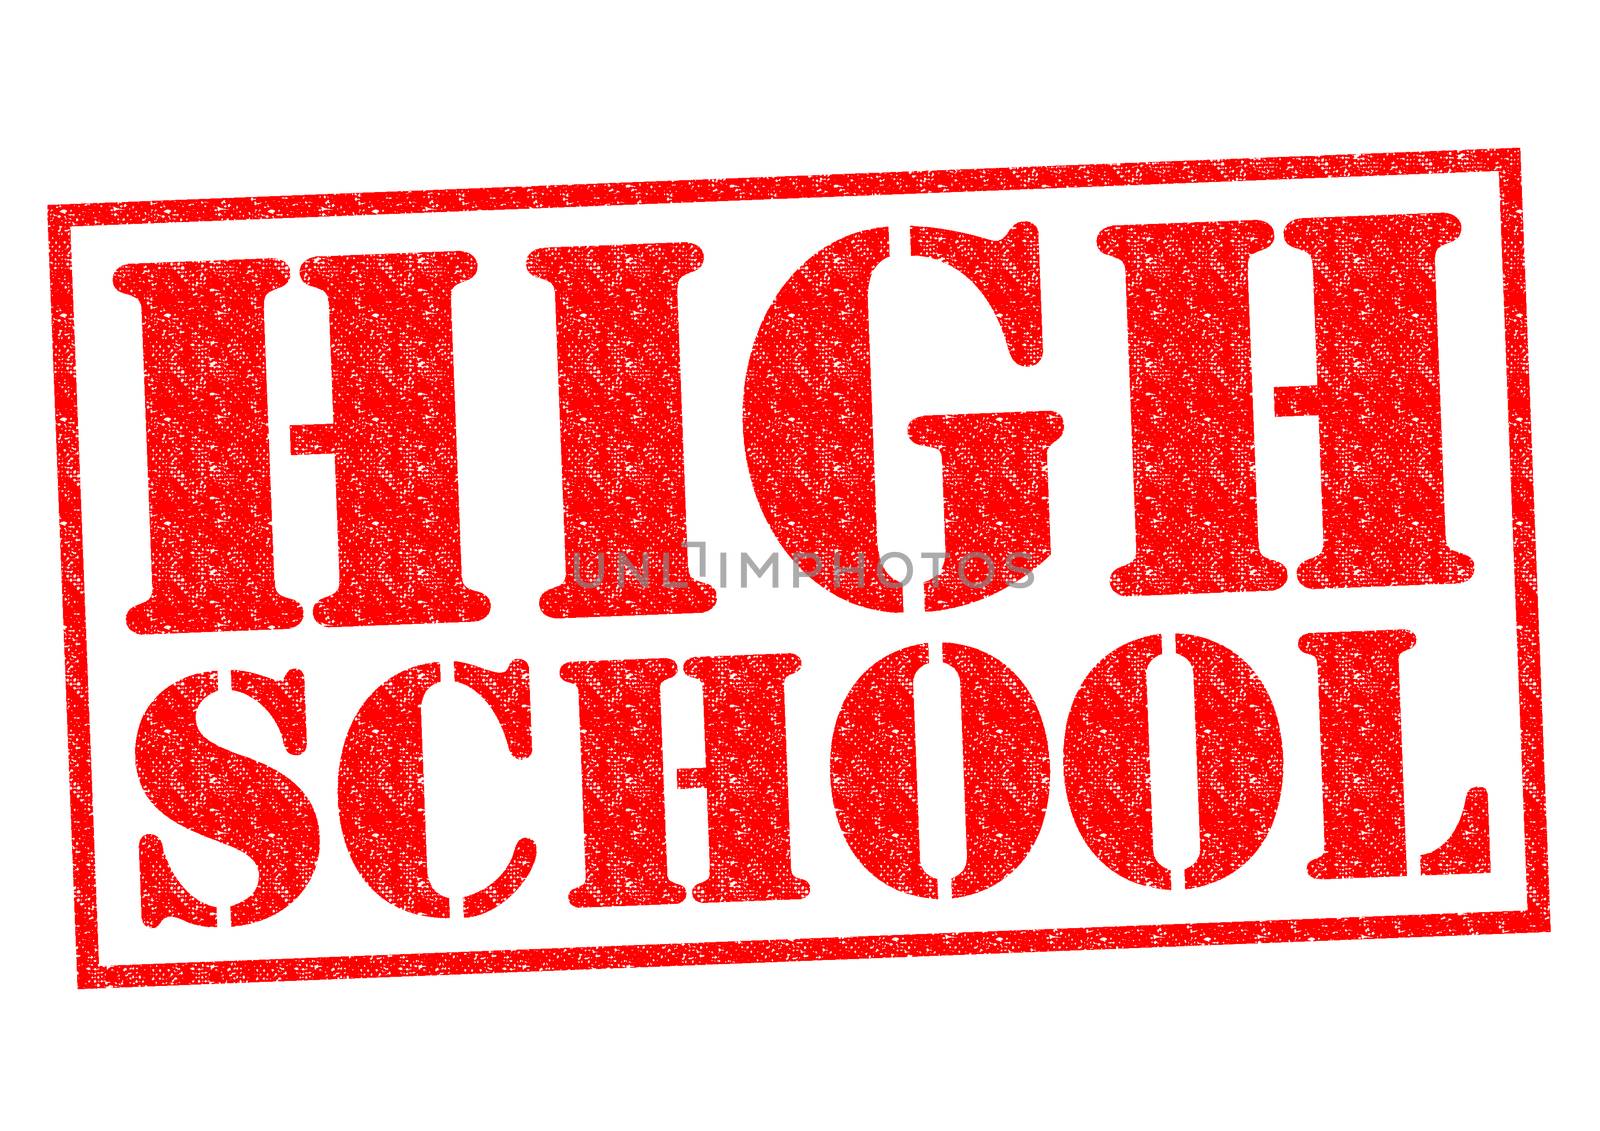 HIGH SCHOOL red Rubber Stamp over a white background.